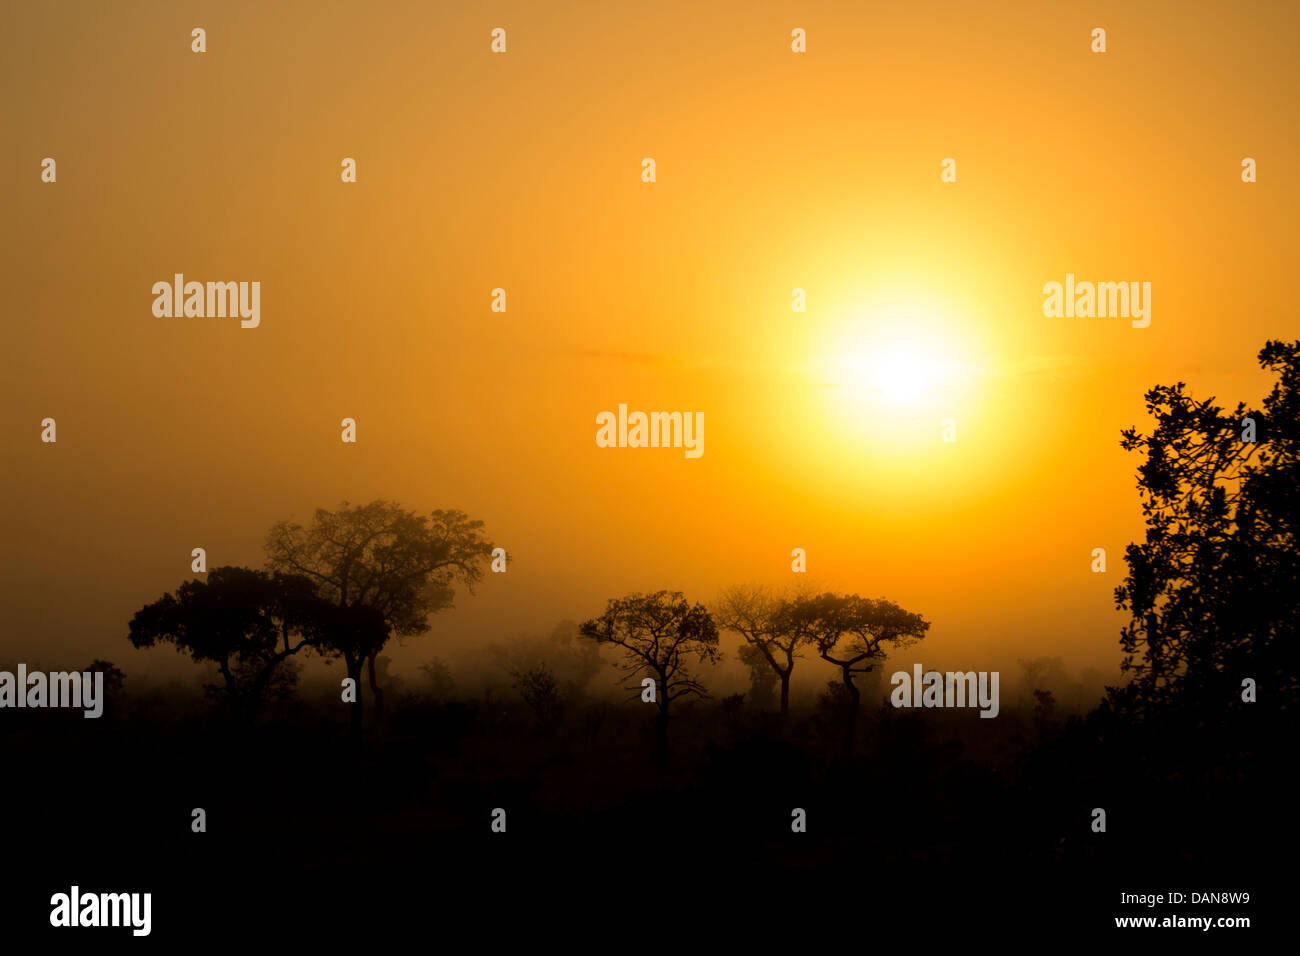 A misty morning sunrise with tree silhouettes Stock Photo